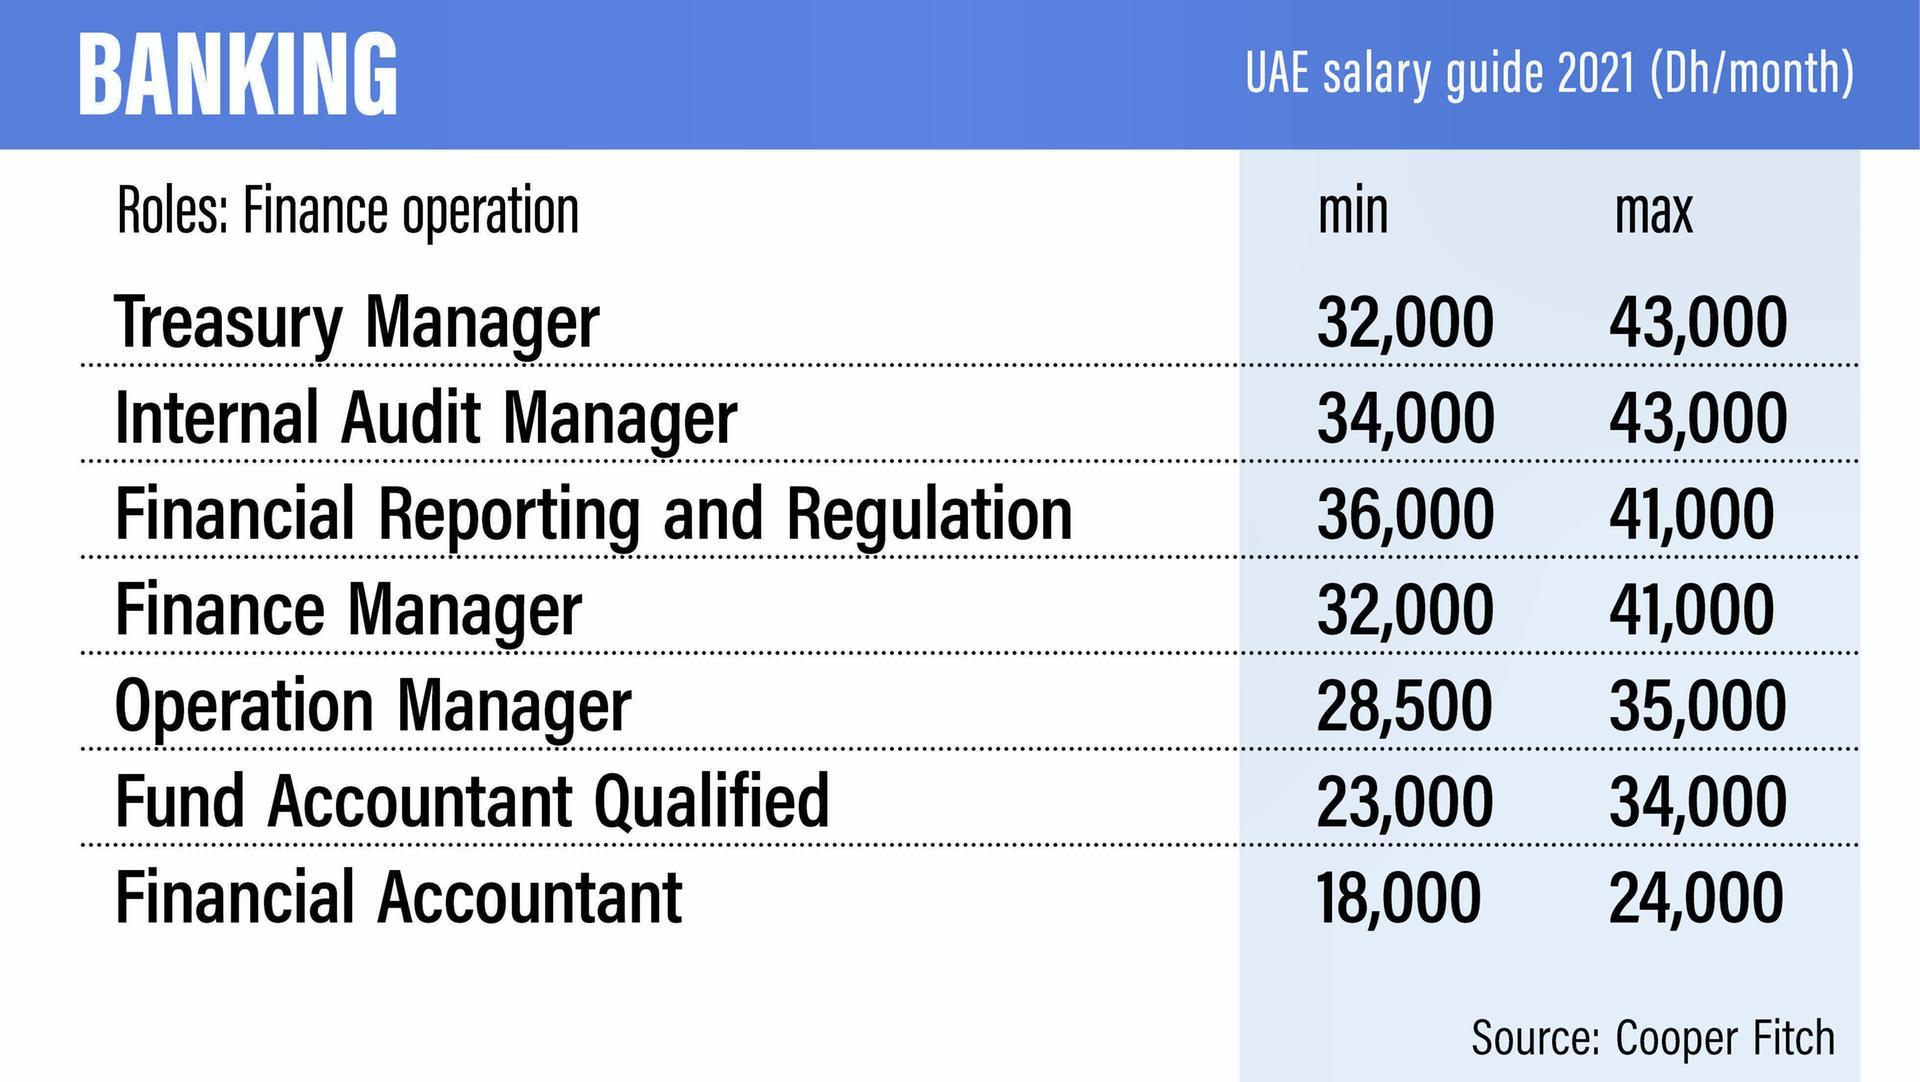 What is a good salary in uae?